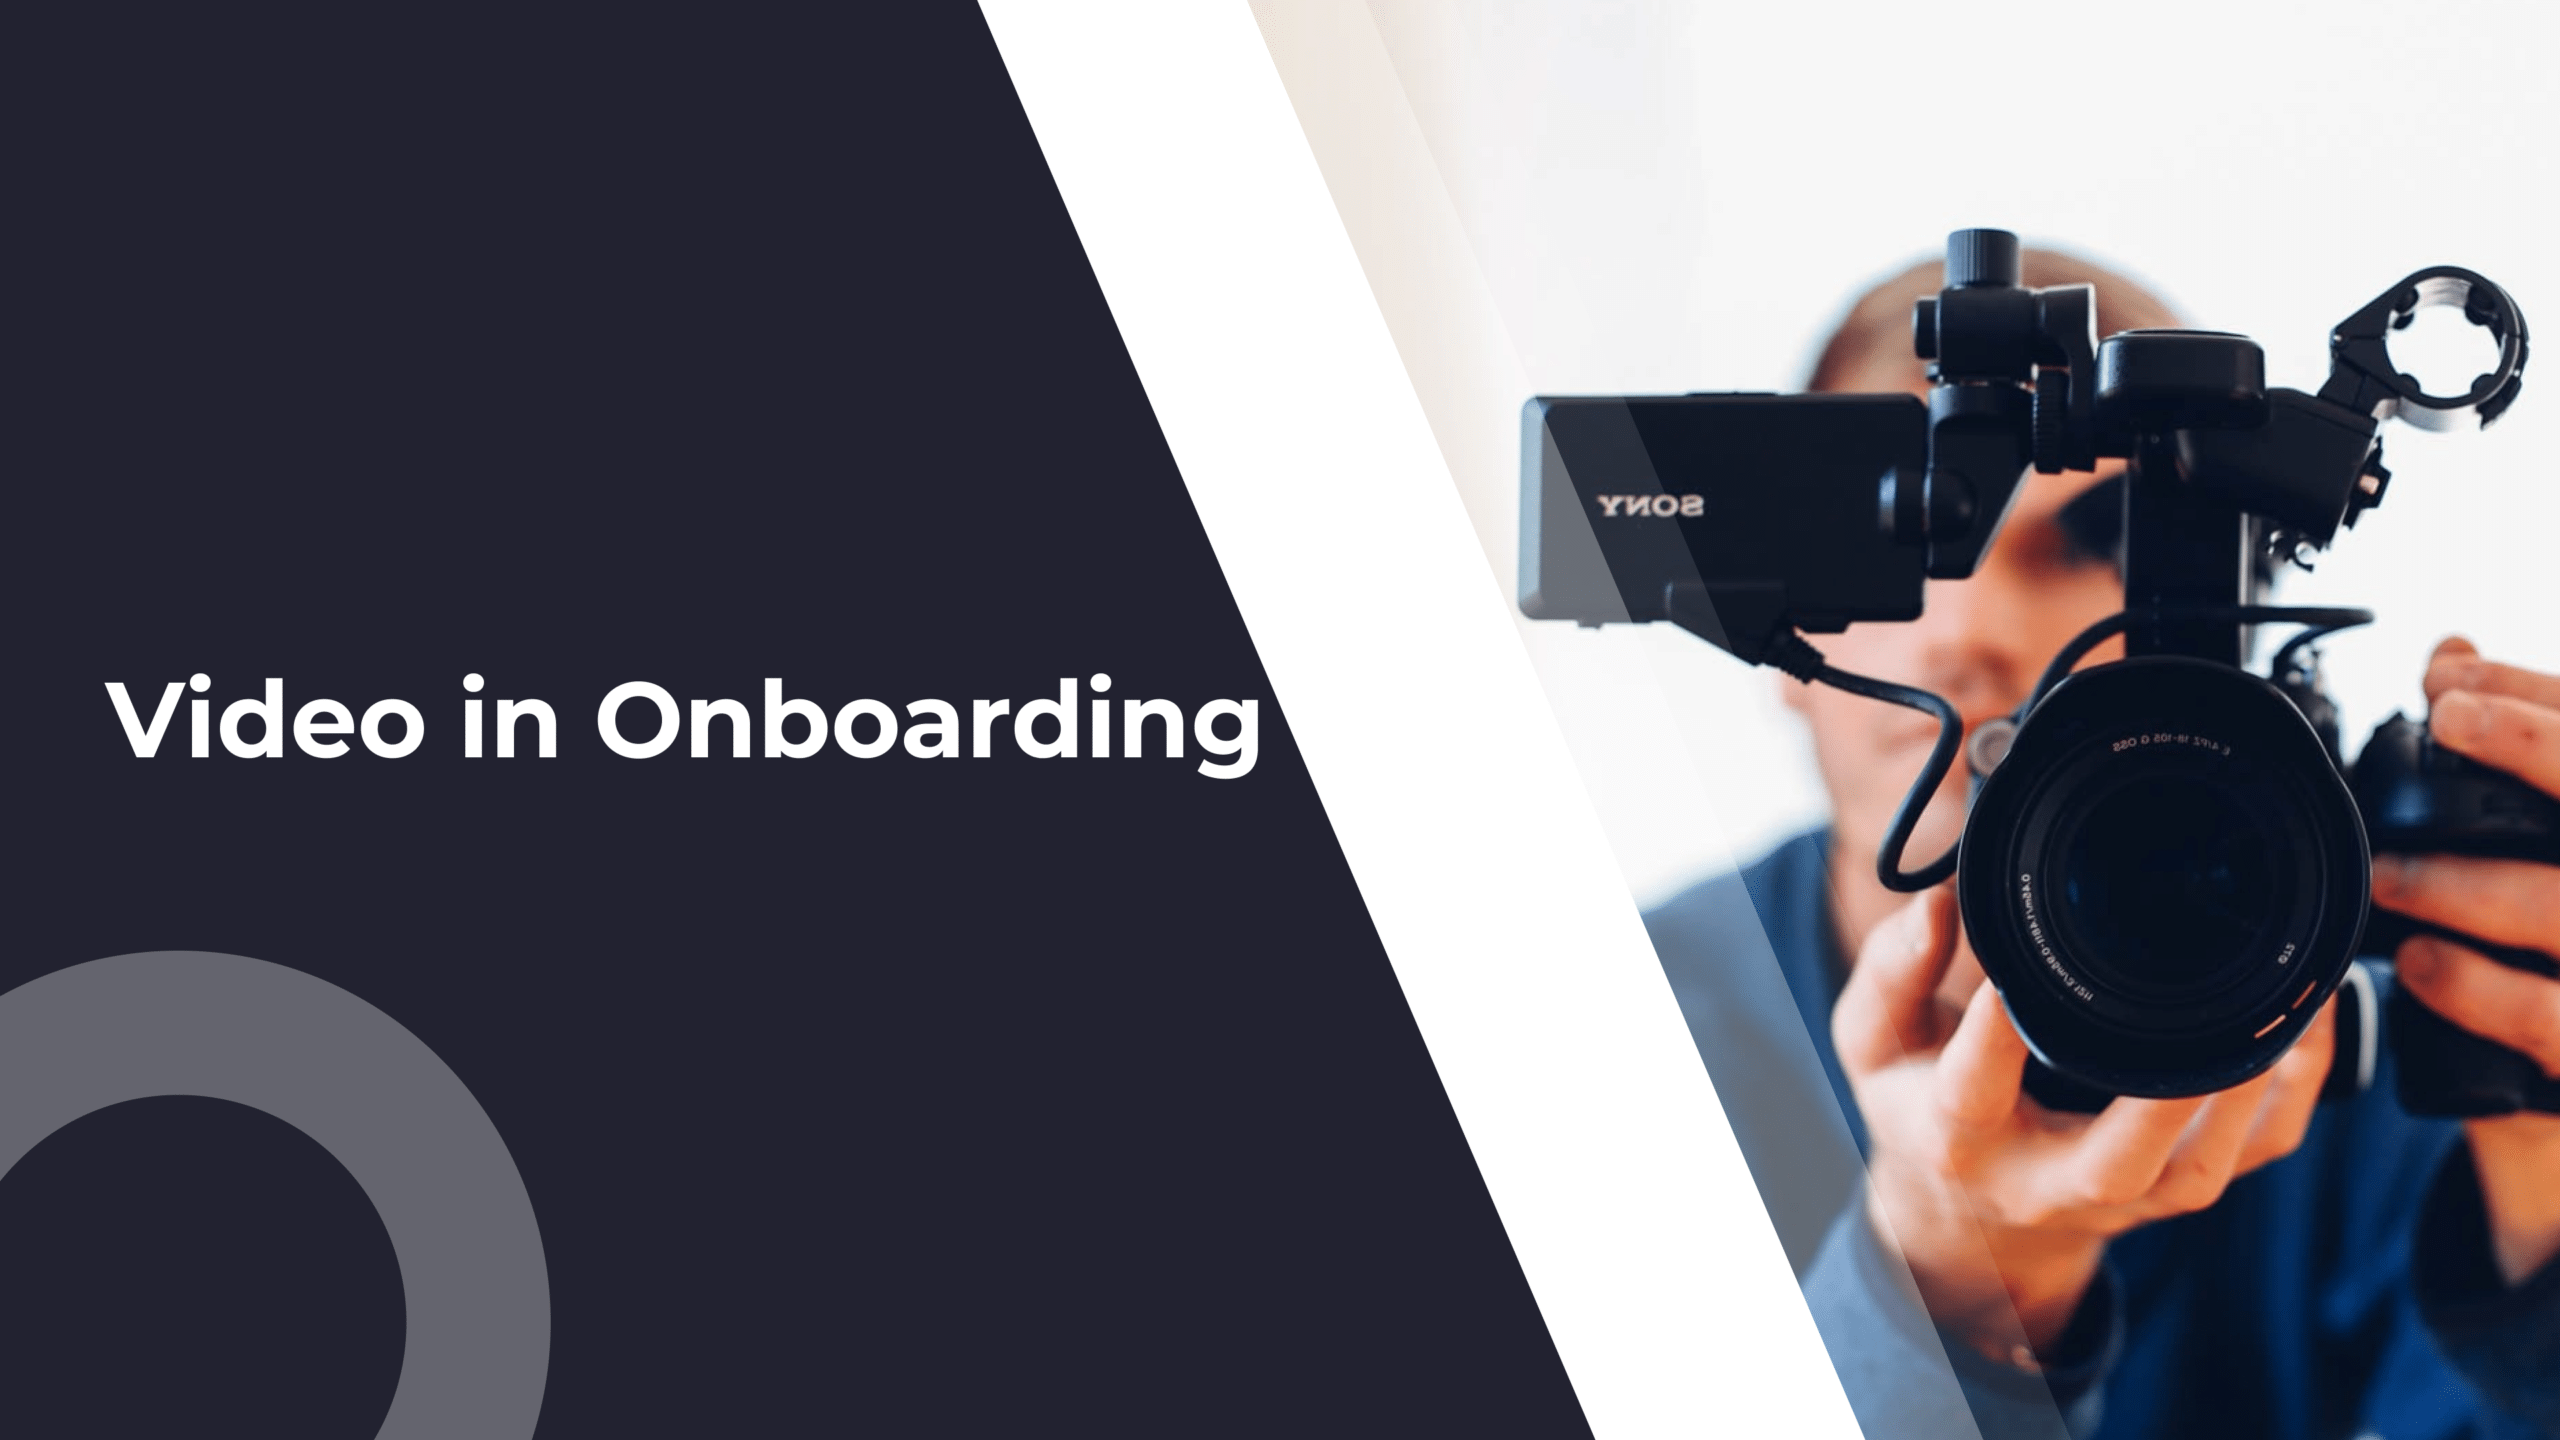 How Customer Success Teams Should Use Video to Improve Onboarding